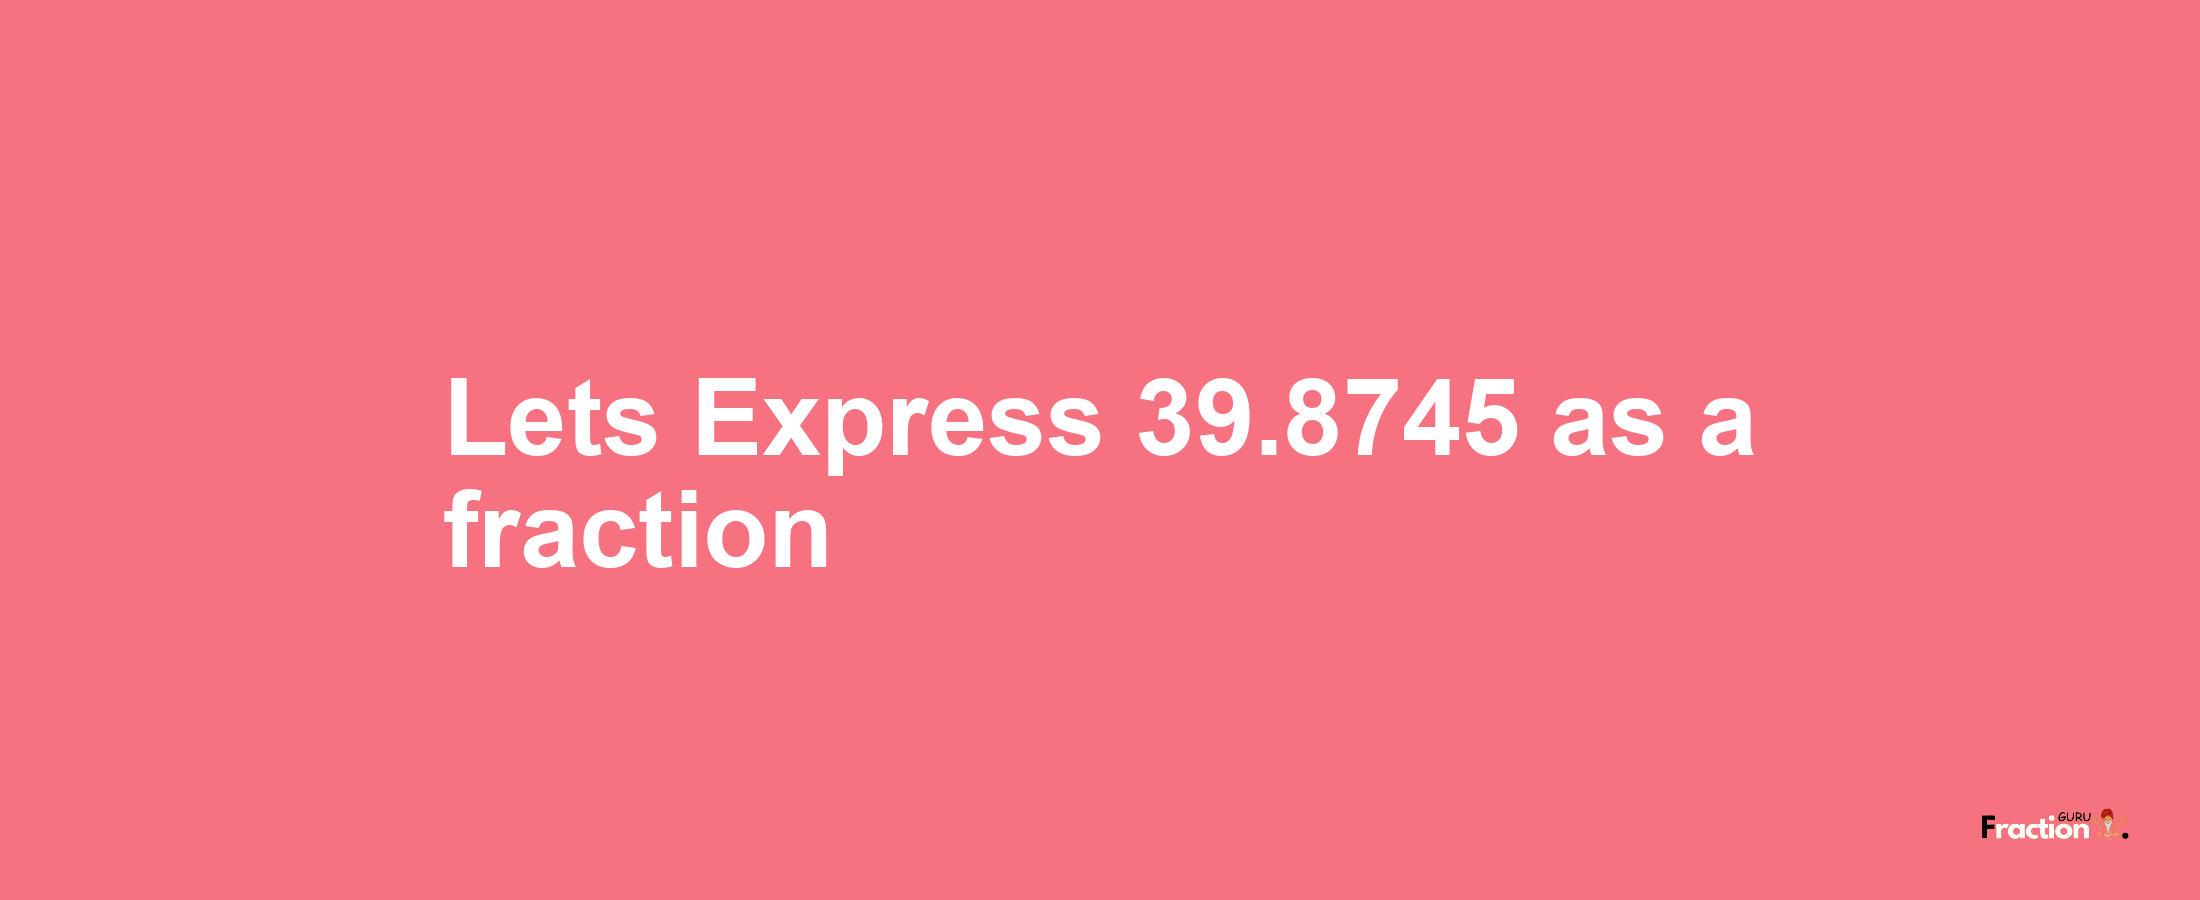 Lets Express 39.8745 as afraction